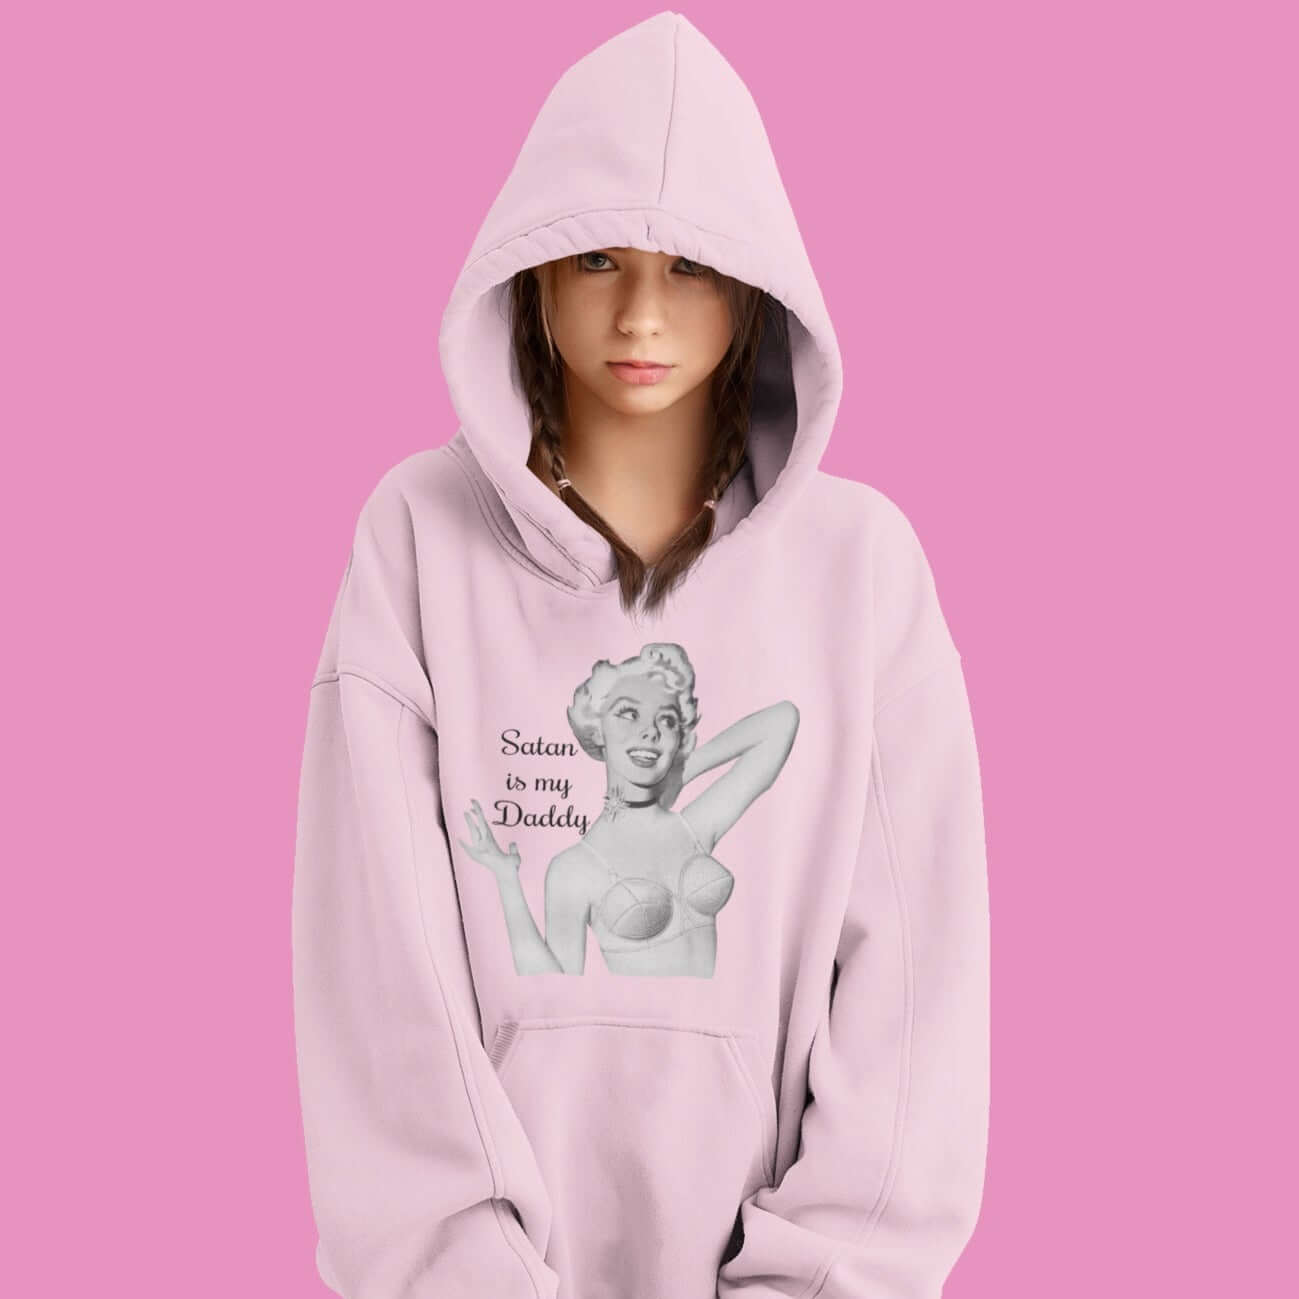 Woman wearing a light pink hoodie sweatshirt with the hood up and partially covering her face. The hoodie has an image of a retro black & white pin-up model and the phrase Satan is my Daddy printed on the front.